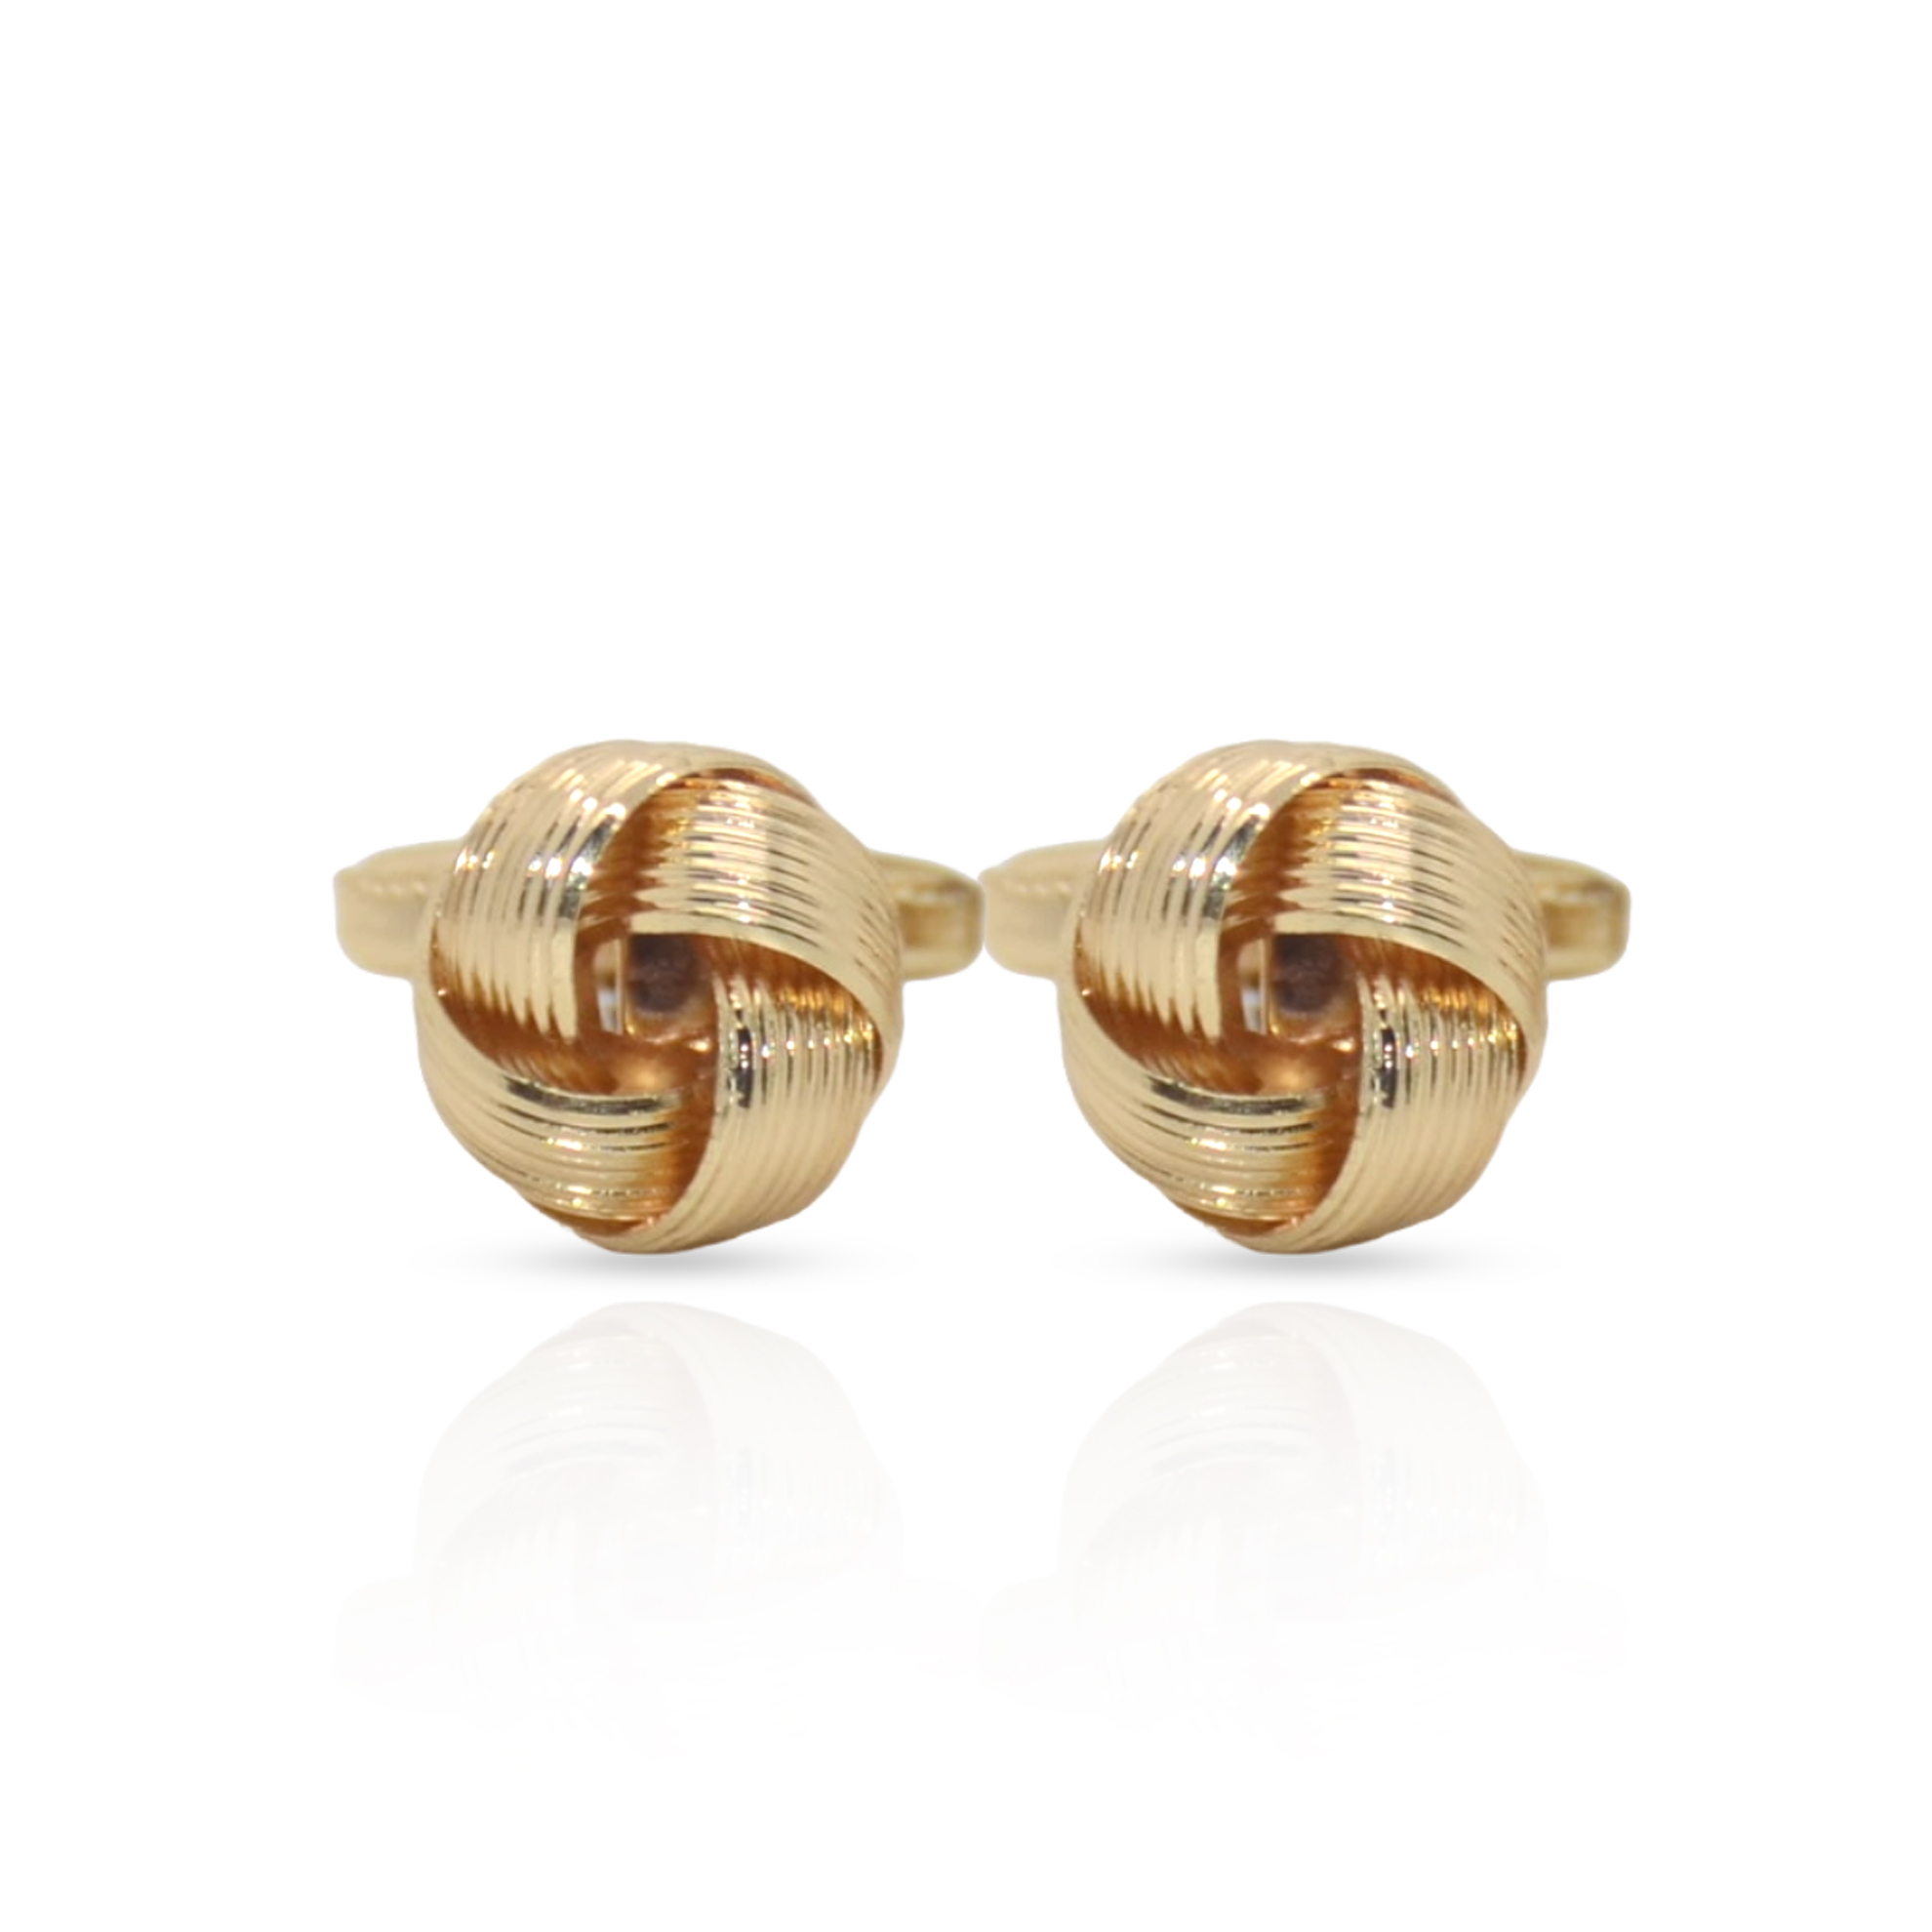 Cufflers Classic Gold and Silver Round Cufflinks with Free Gift Box – CU-0013 – Gold